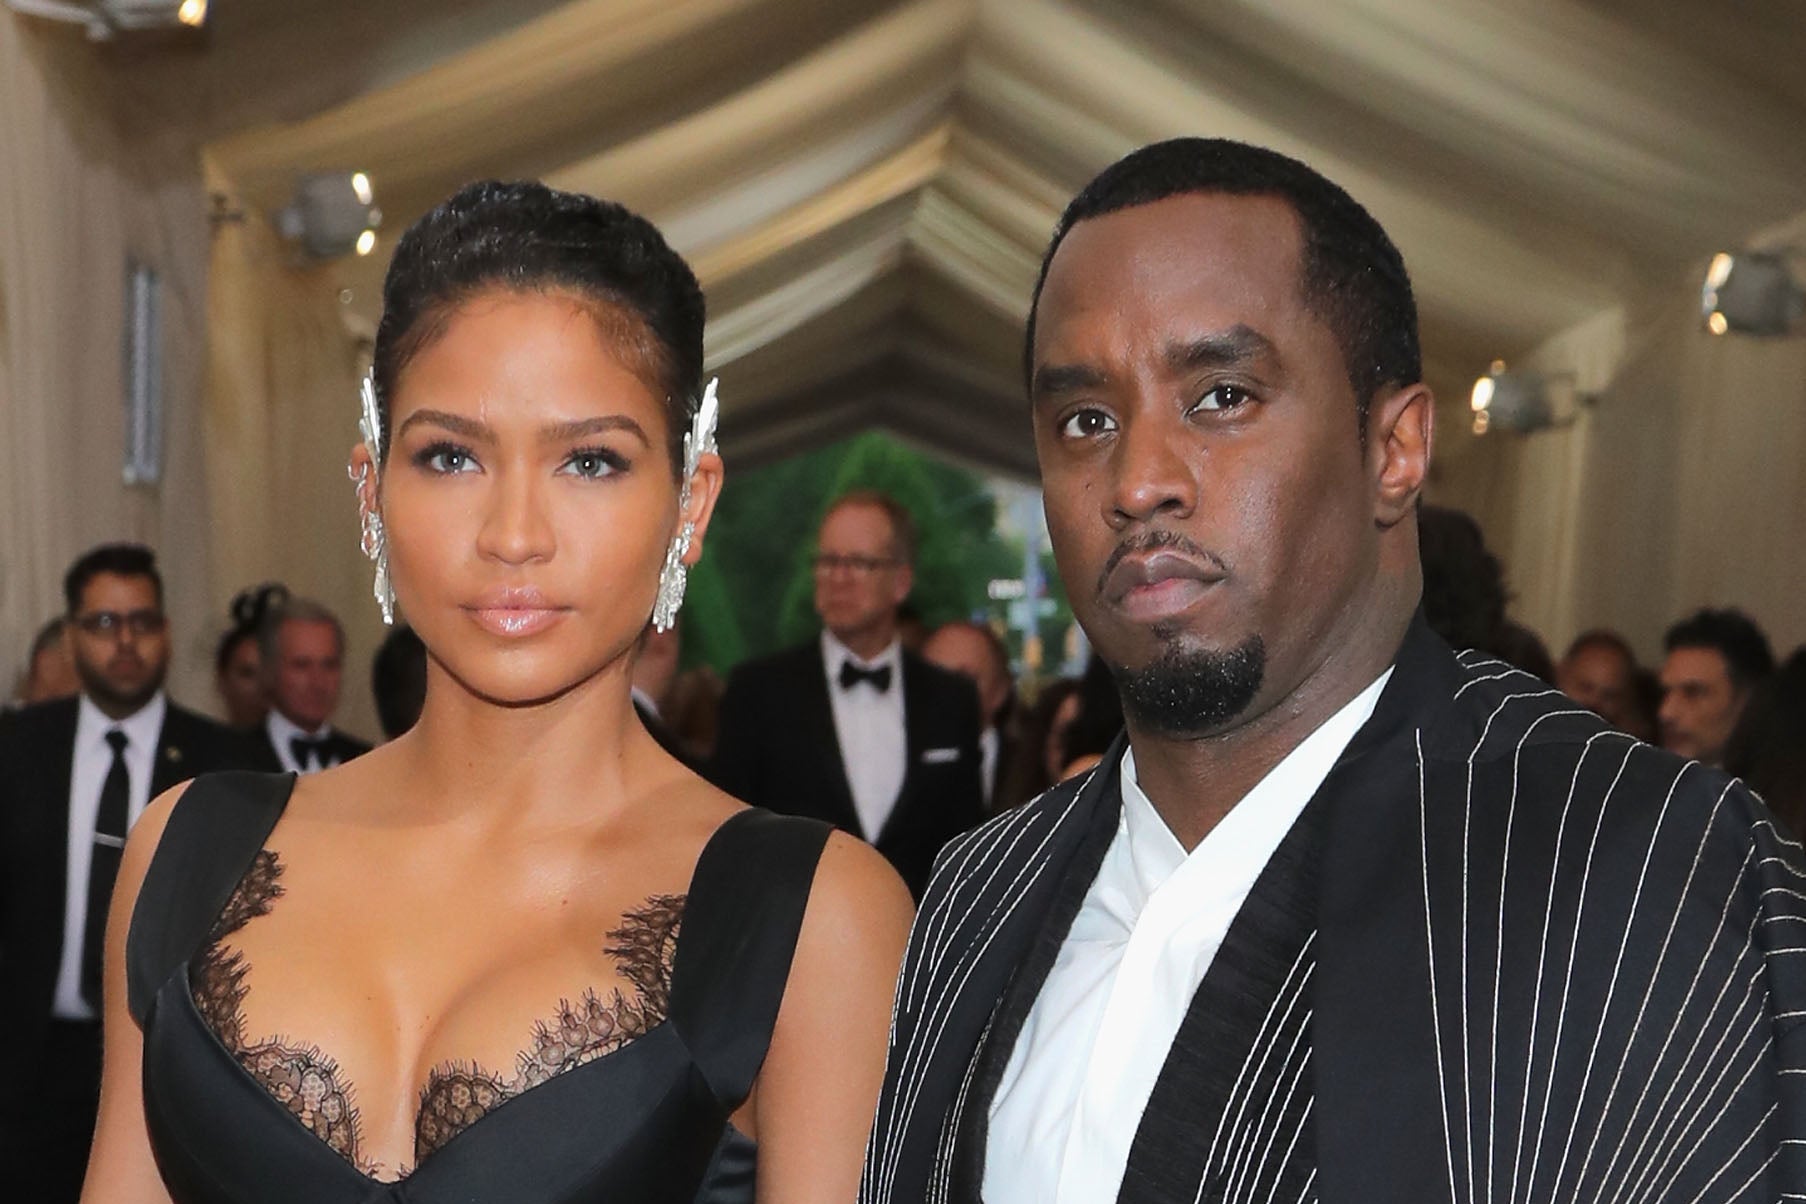 The new lawsuit comes one week after Mr Combs was accused of rape and repeated physical abuse by his ex-partner, R&B singer Cassie